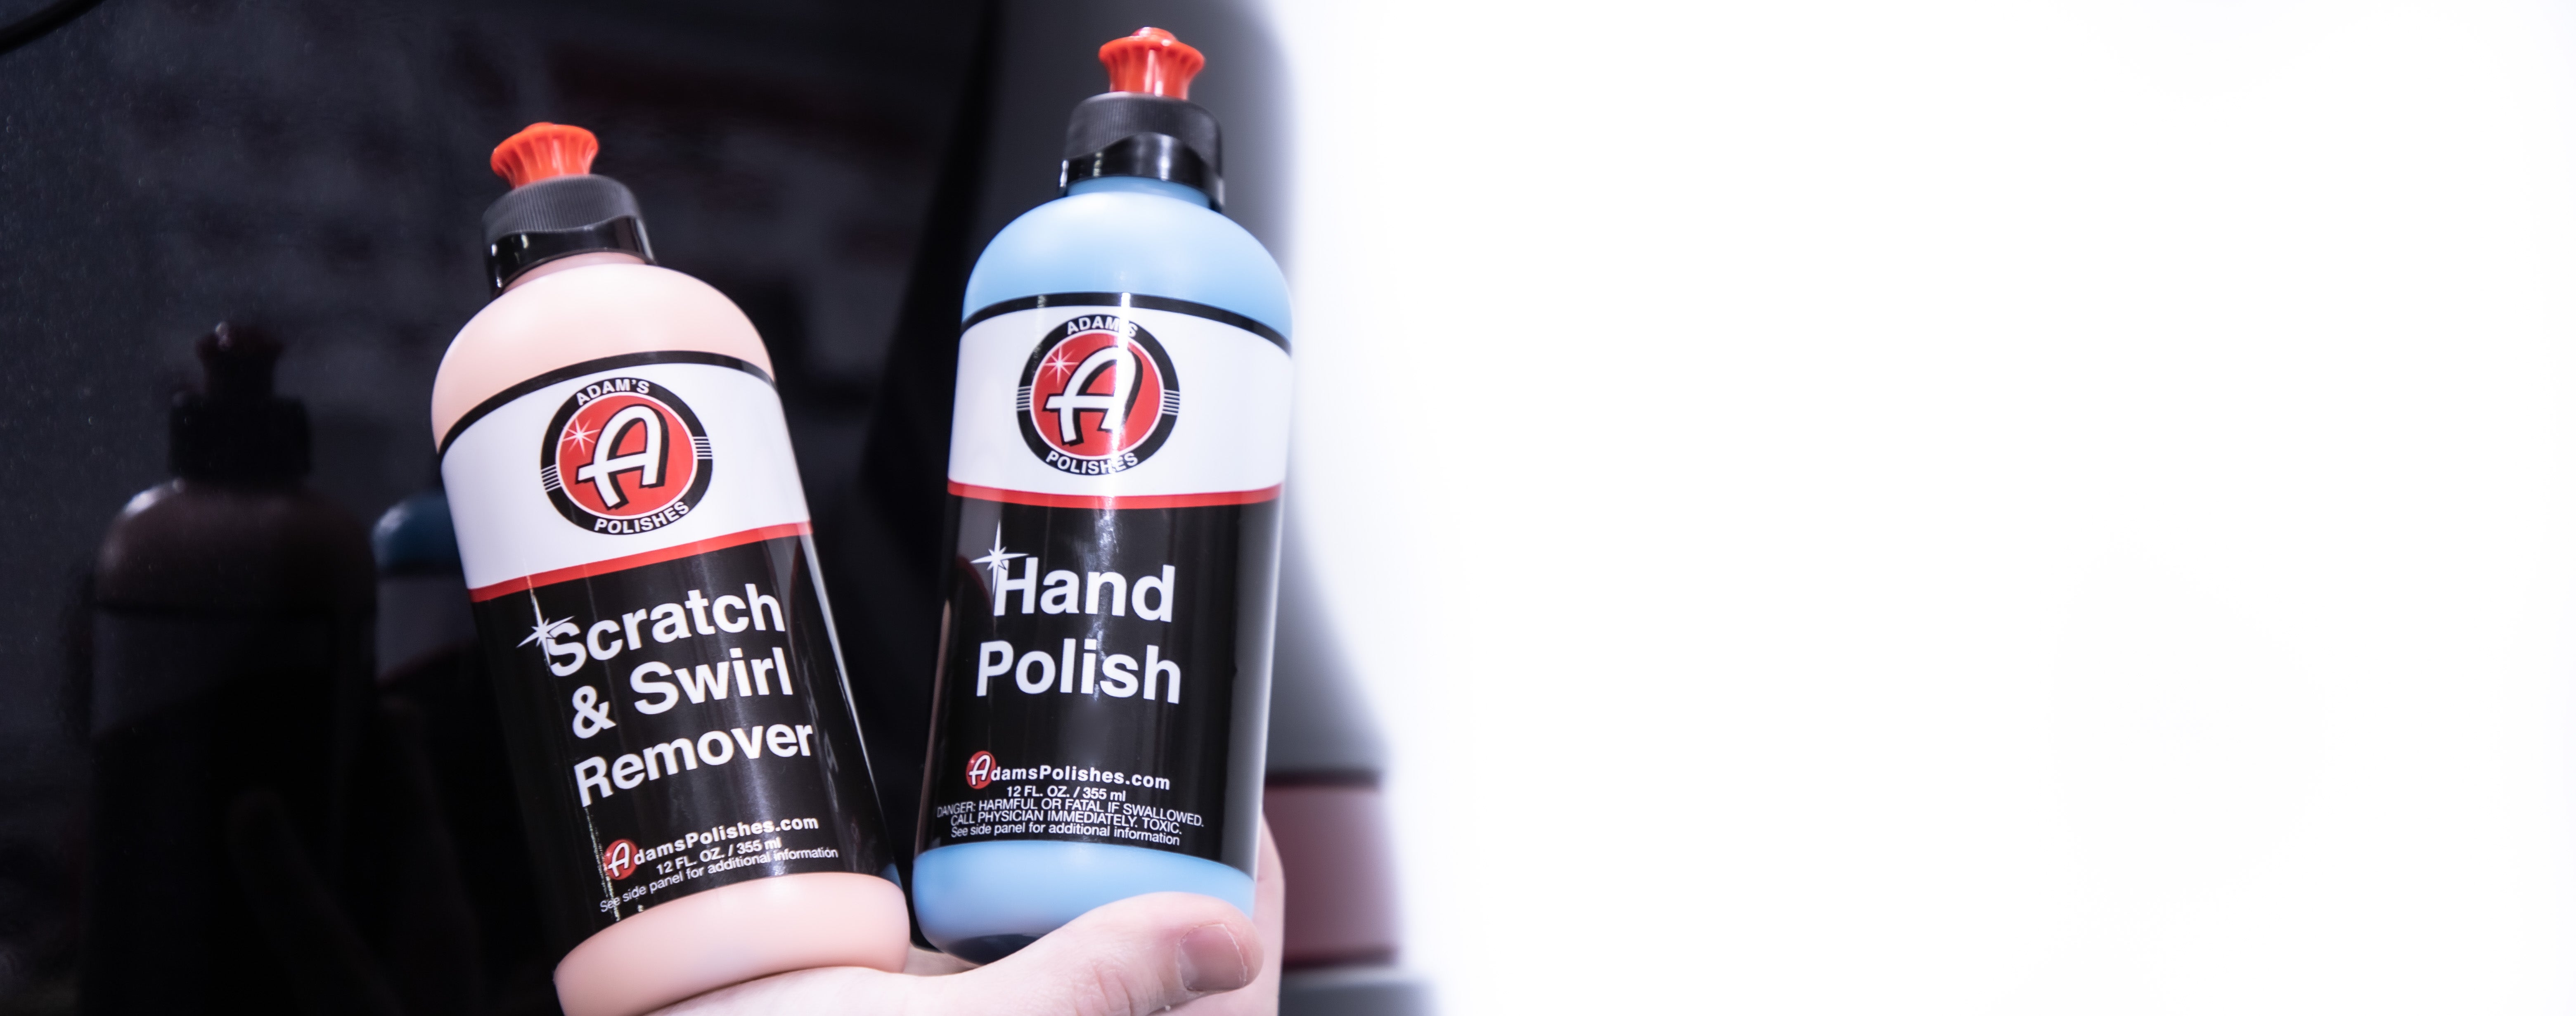 Adam's Polishes Car Scratch & Swirl Remover Hand Correction System | Remove & Restore Paint Transfer, Minor Imperfections, & Oxidation | Paired with O